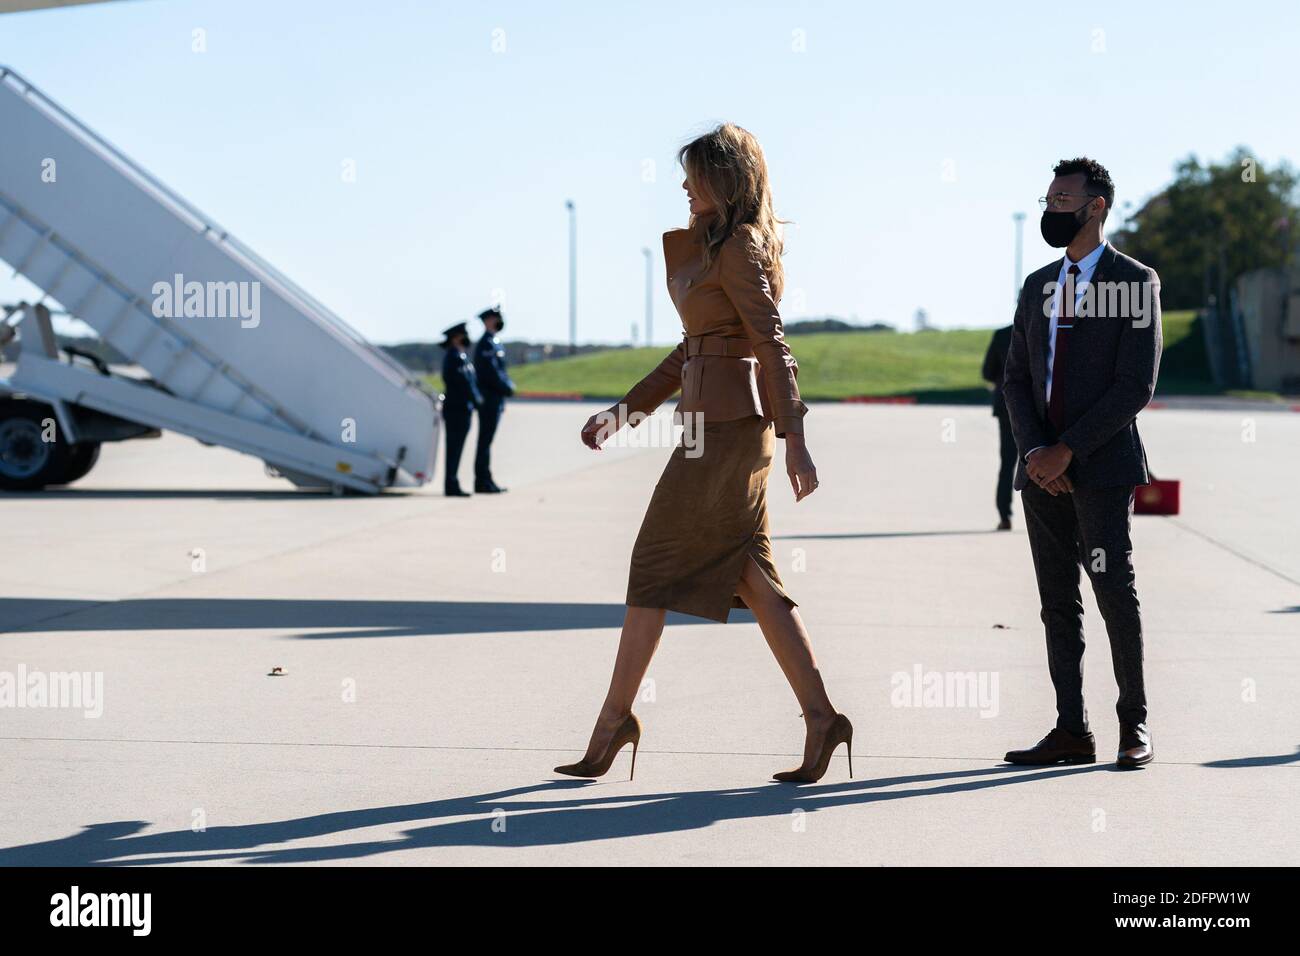 Washington, United States Of America. 02nd Nov, 2020. First Lady Melania Trump walks across the tarmac at Joint Base Andrews, Md. Sunday, Nov. 1, 2020, before boarding Bright Star to begin her trip to North Carolina. People: First Lady Melania Trump Credit: Storms Media Group/Alamy Live News Stock Photo